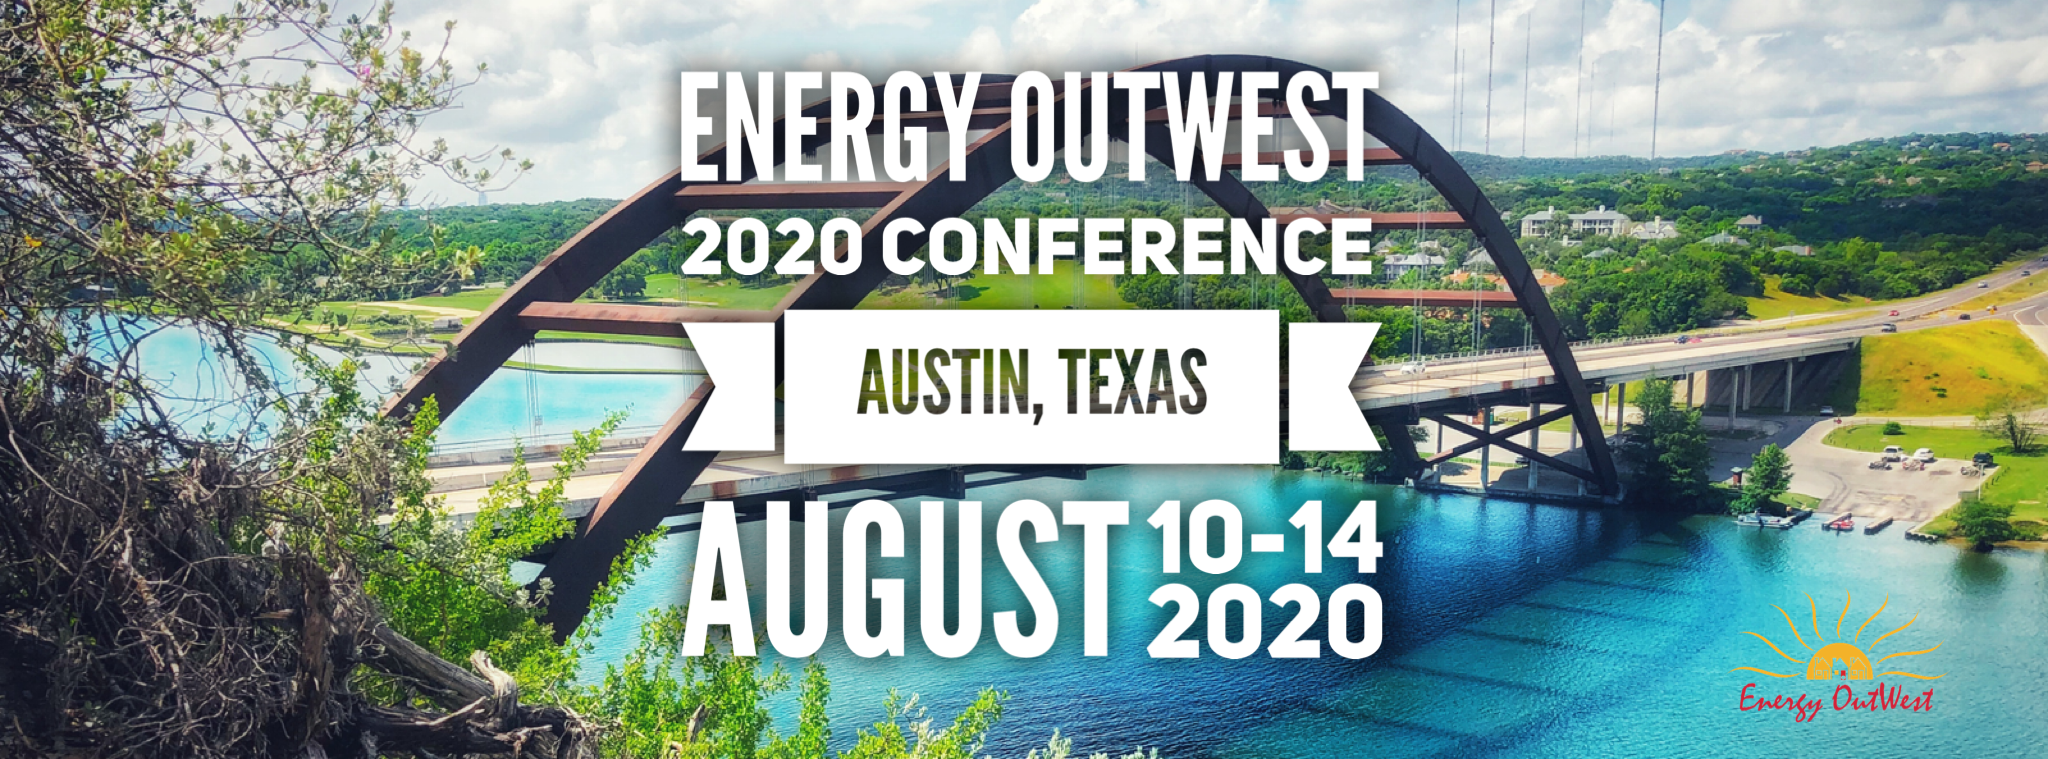 Energy OutWest > 2020 Conference > Past Conferences > 2018 Conference